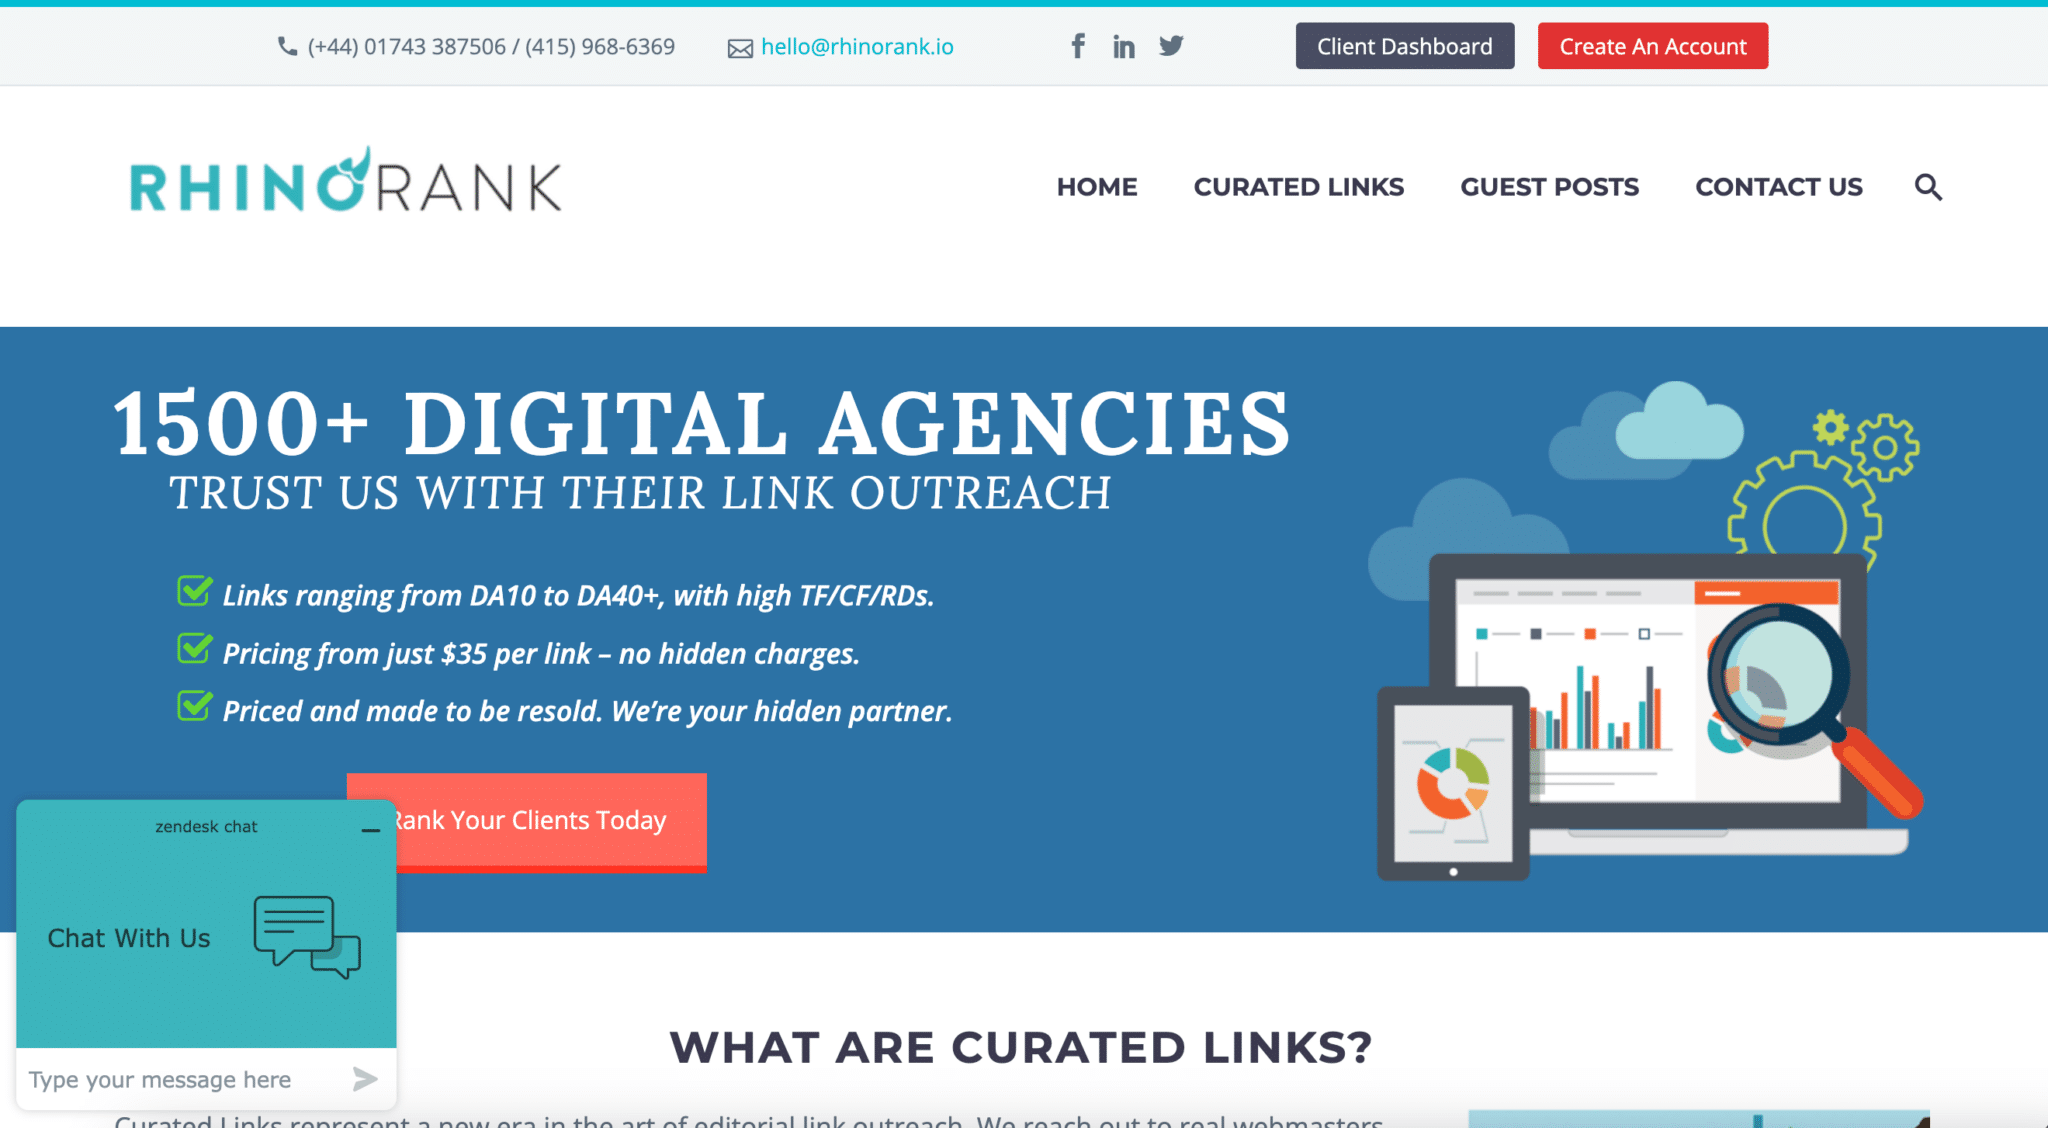 Use Rhino Rank's services to add curated guest posts with linkable keywords.